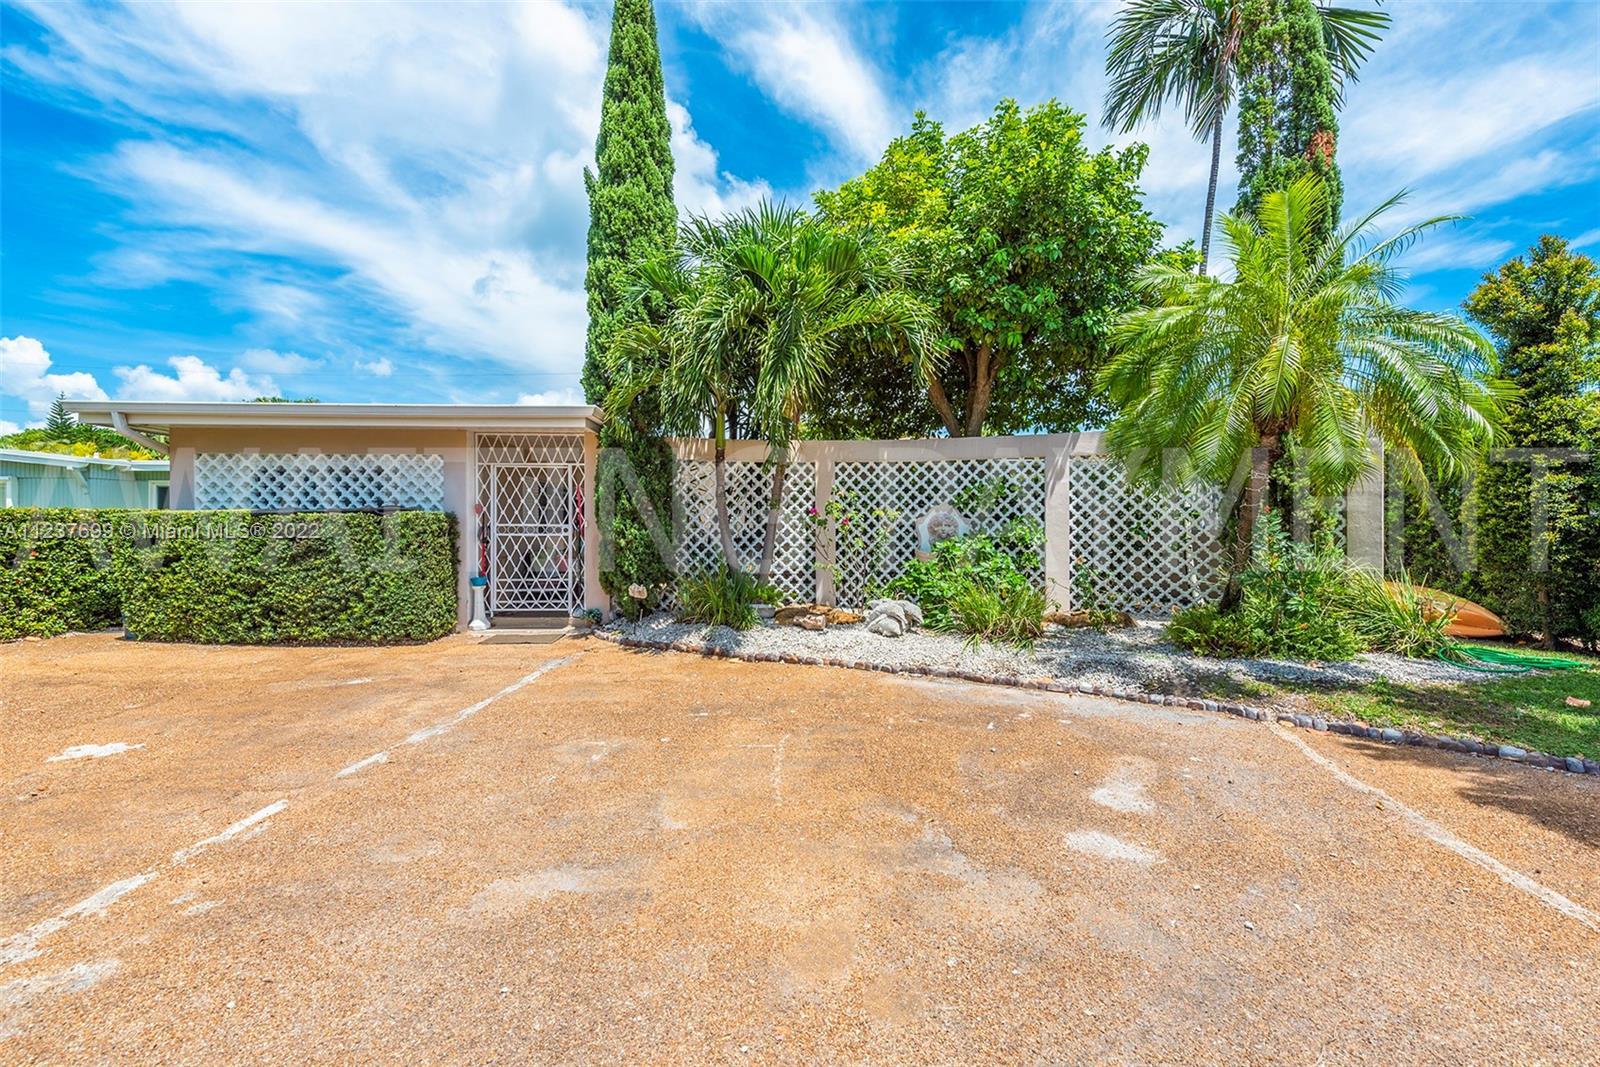 Desirable location with a Well Manicured and Spacious Layout. Renovated Pool and backyard space, Gra